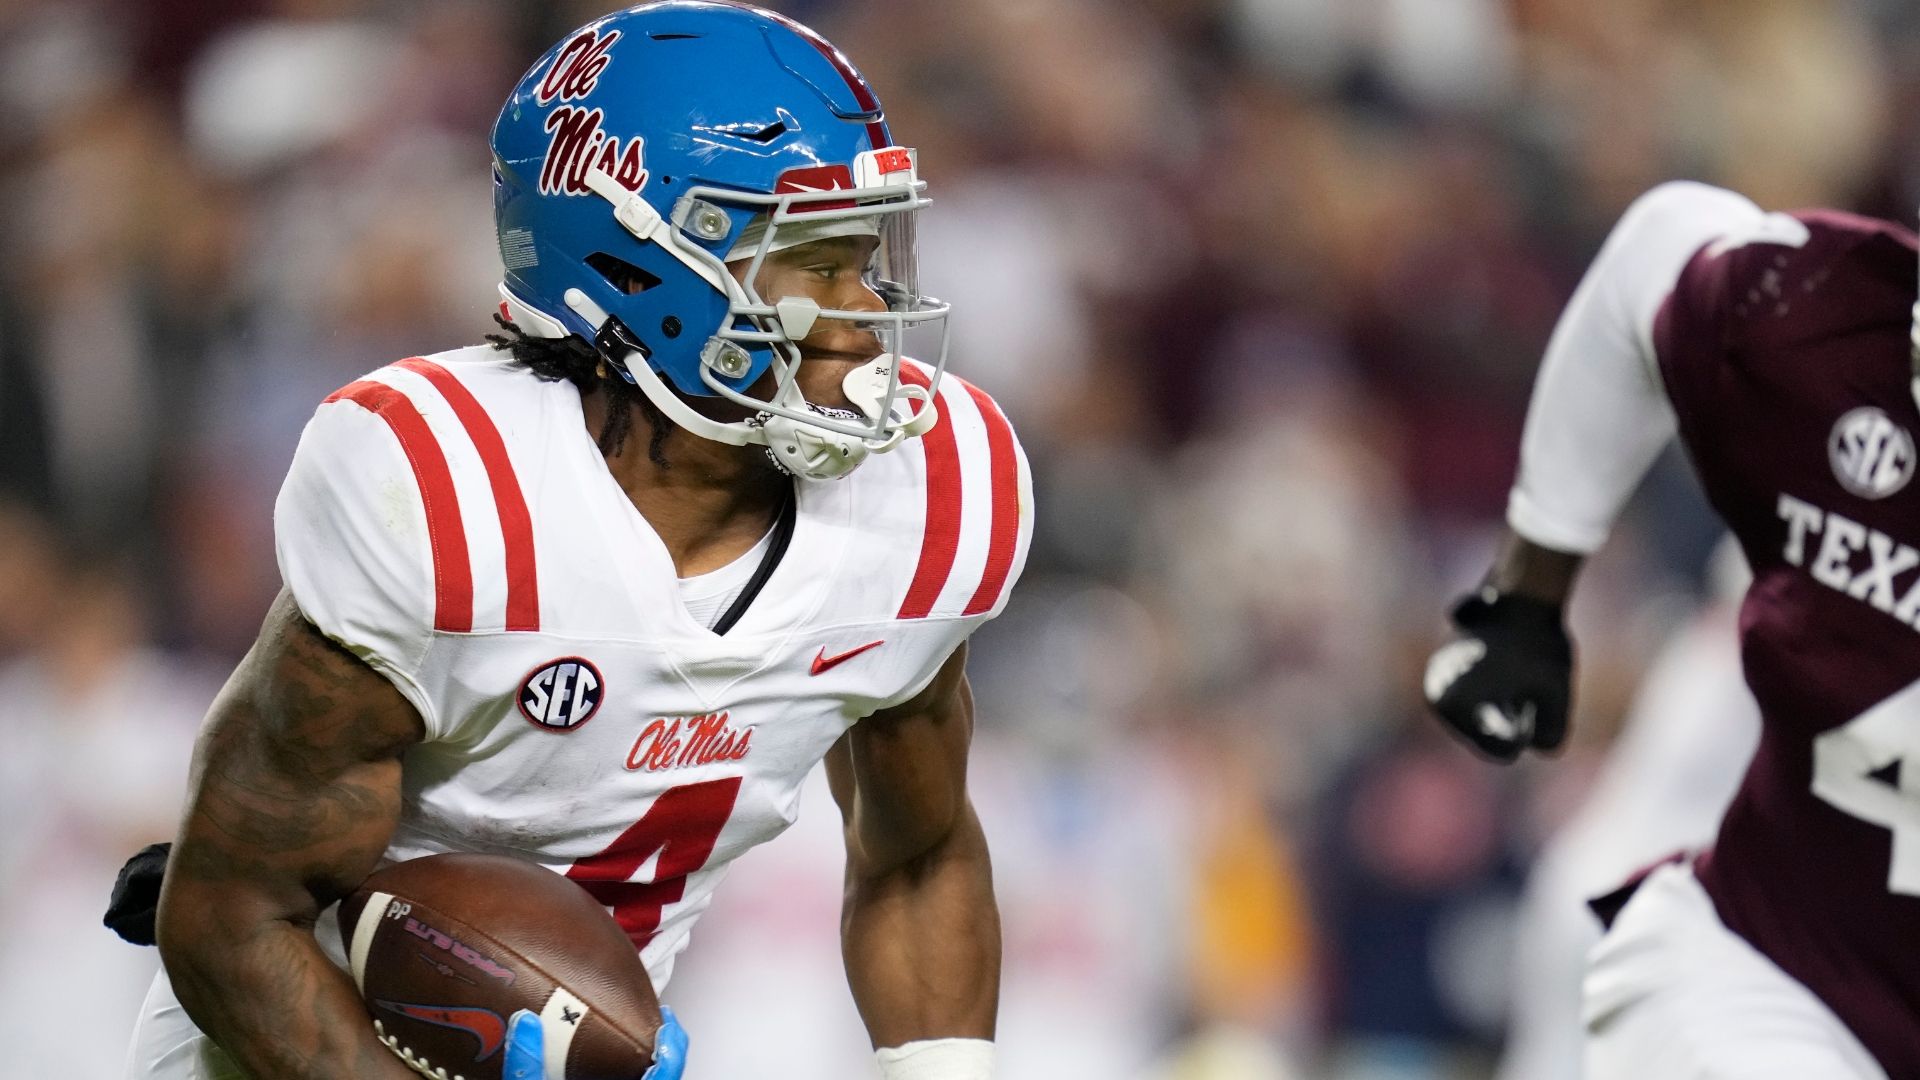 Ole Miss RB Judkins secures his place in SEC history